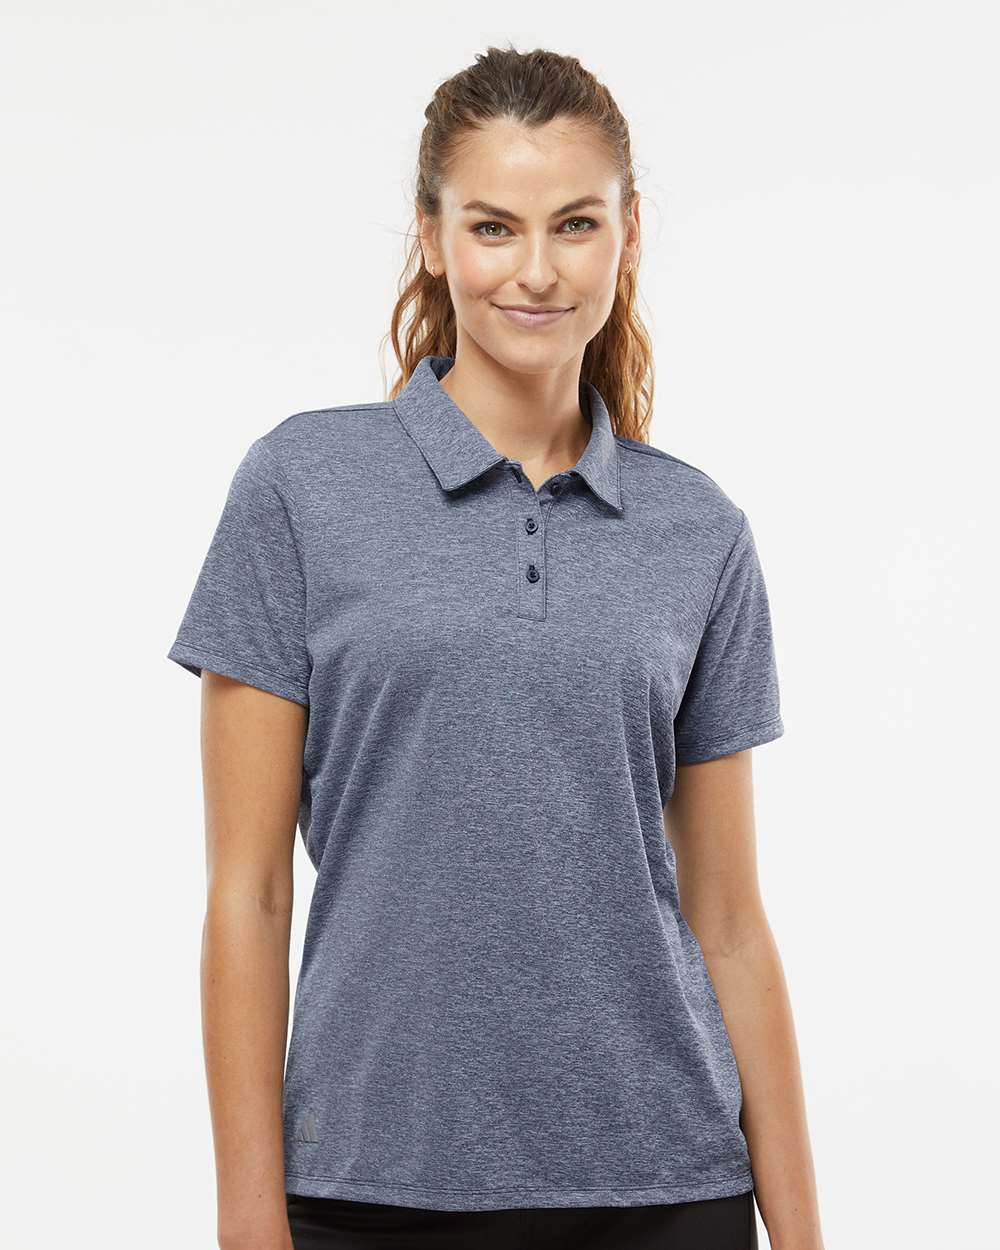 Adidas A583 Women's Heathered Polo #colormdl_Collegiate Navy Melange